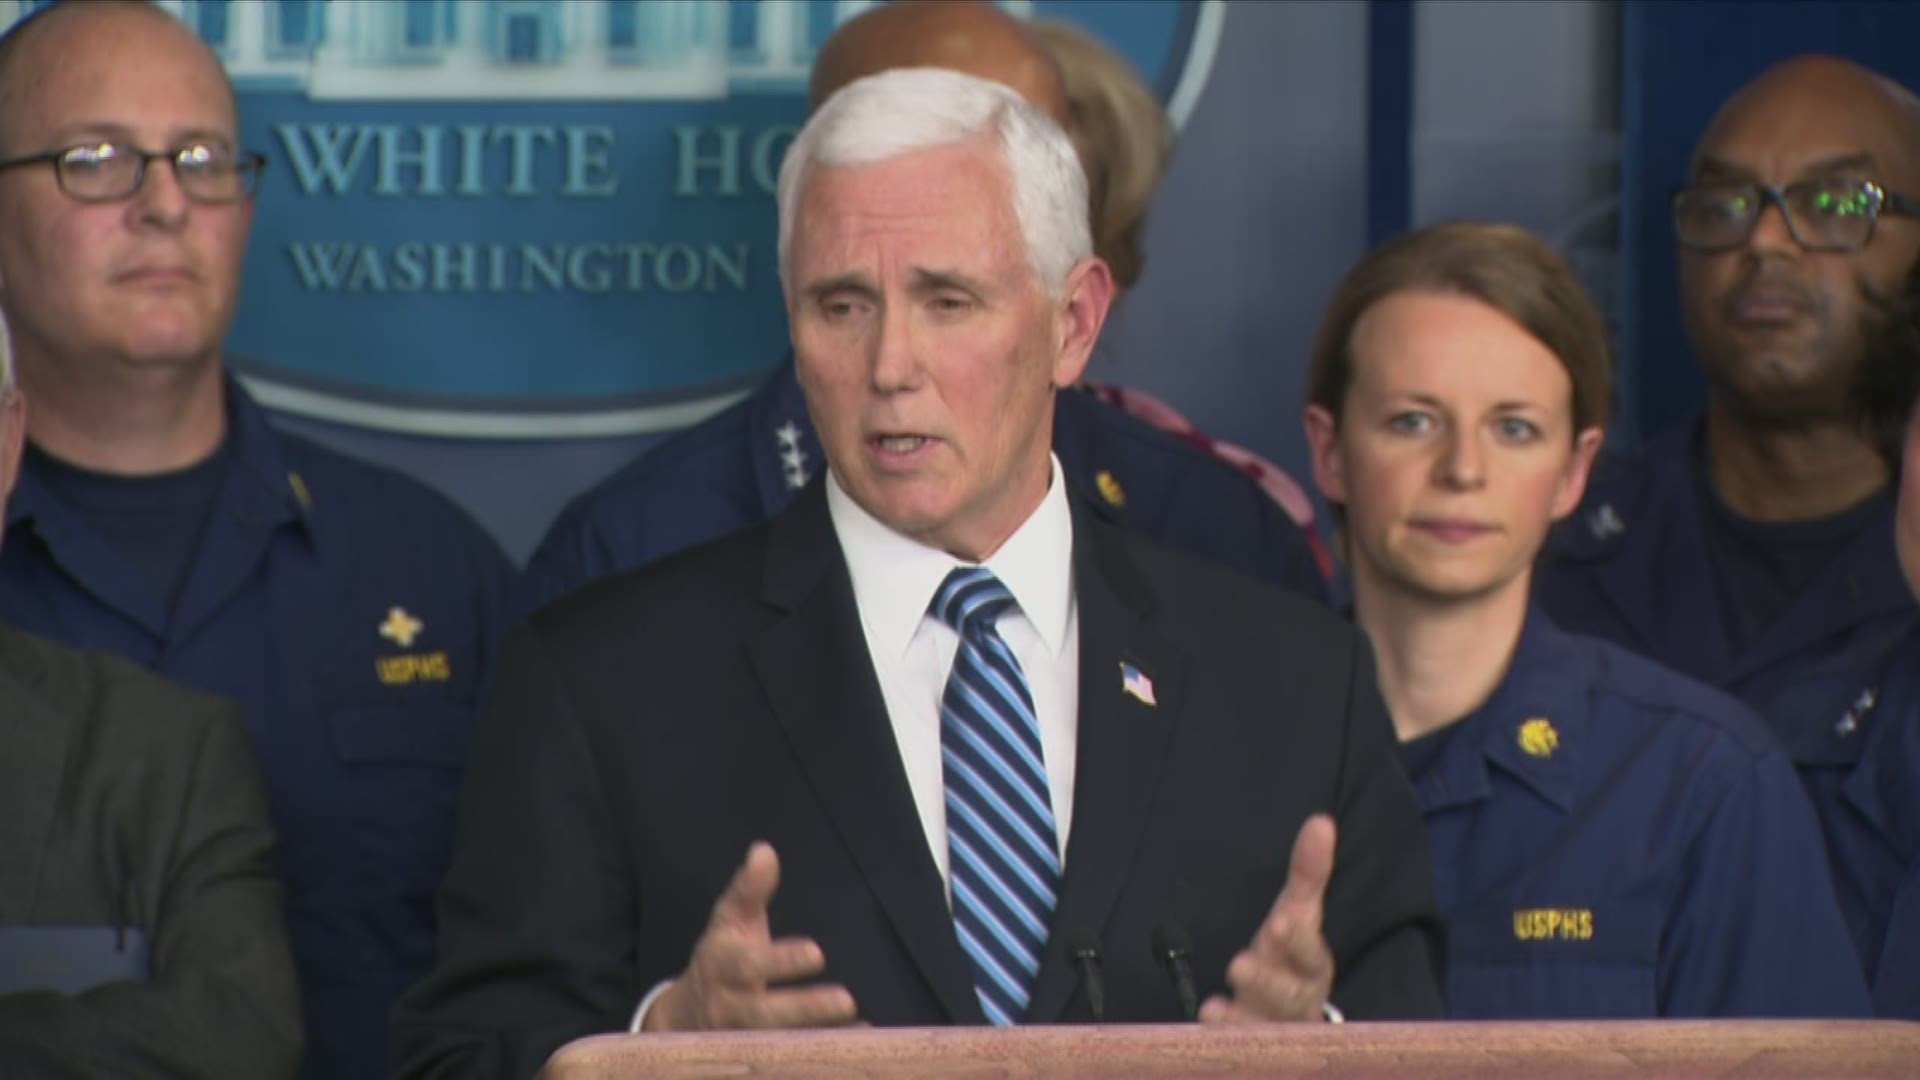 Vice President Pence encouraged everyone to continue taking steps to prevent the spread of coronavirus and think of those who may be at high-risk.